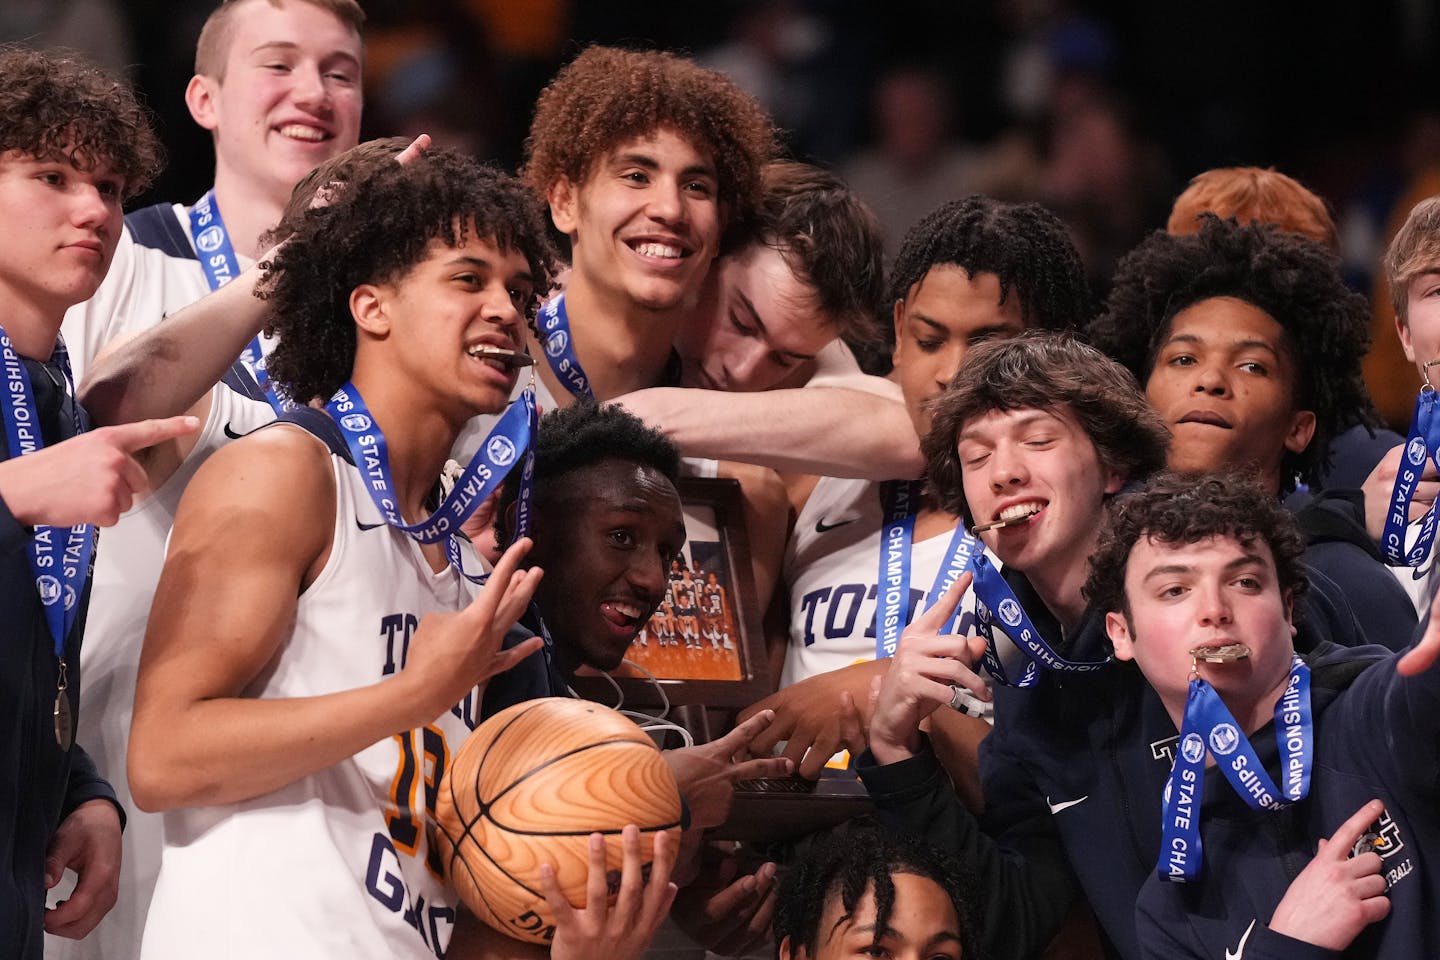 Four championships in the Minnesota boys' basketball state tournament